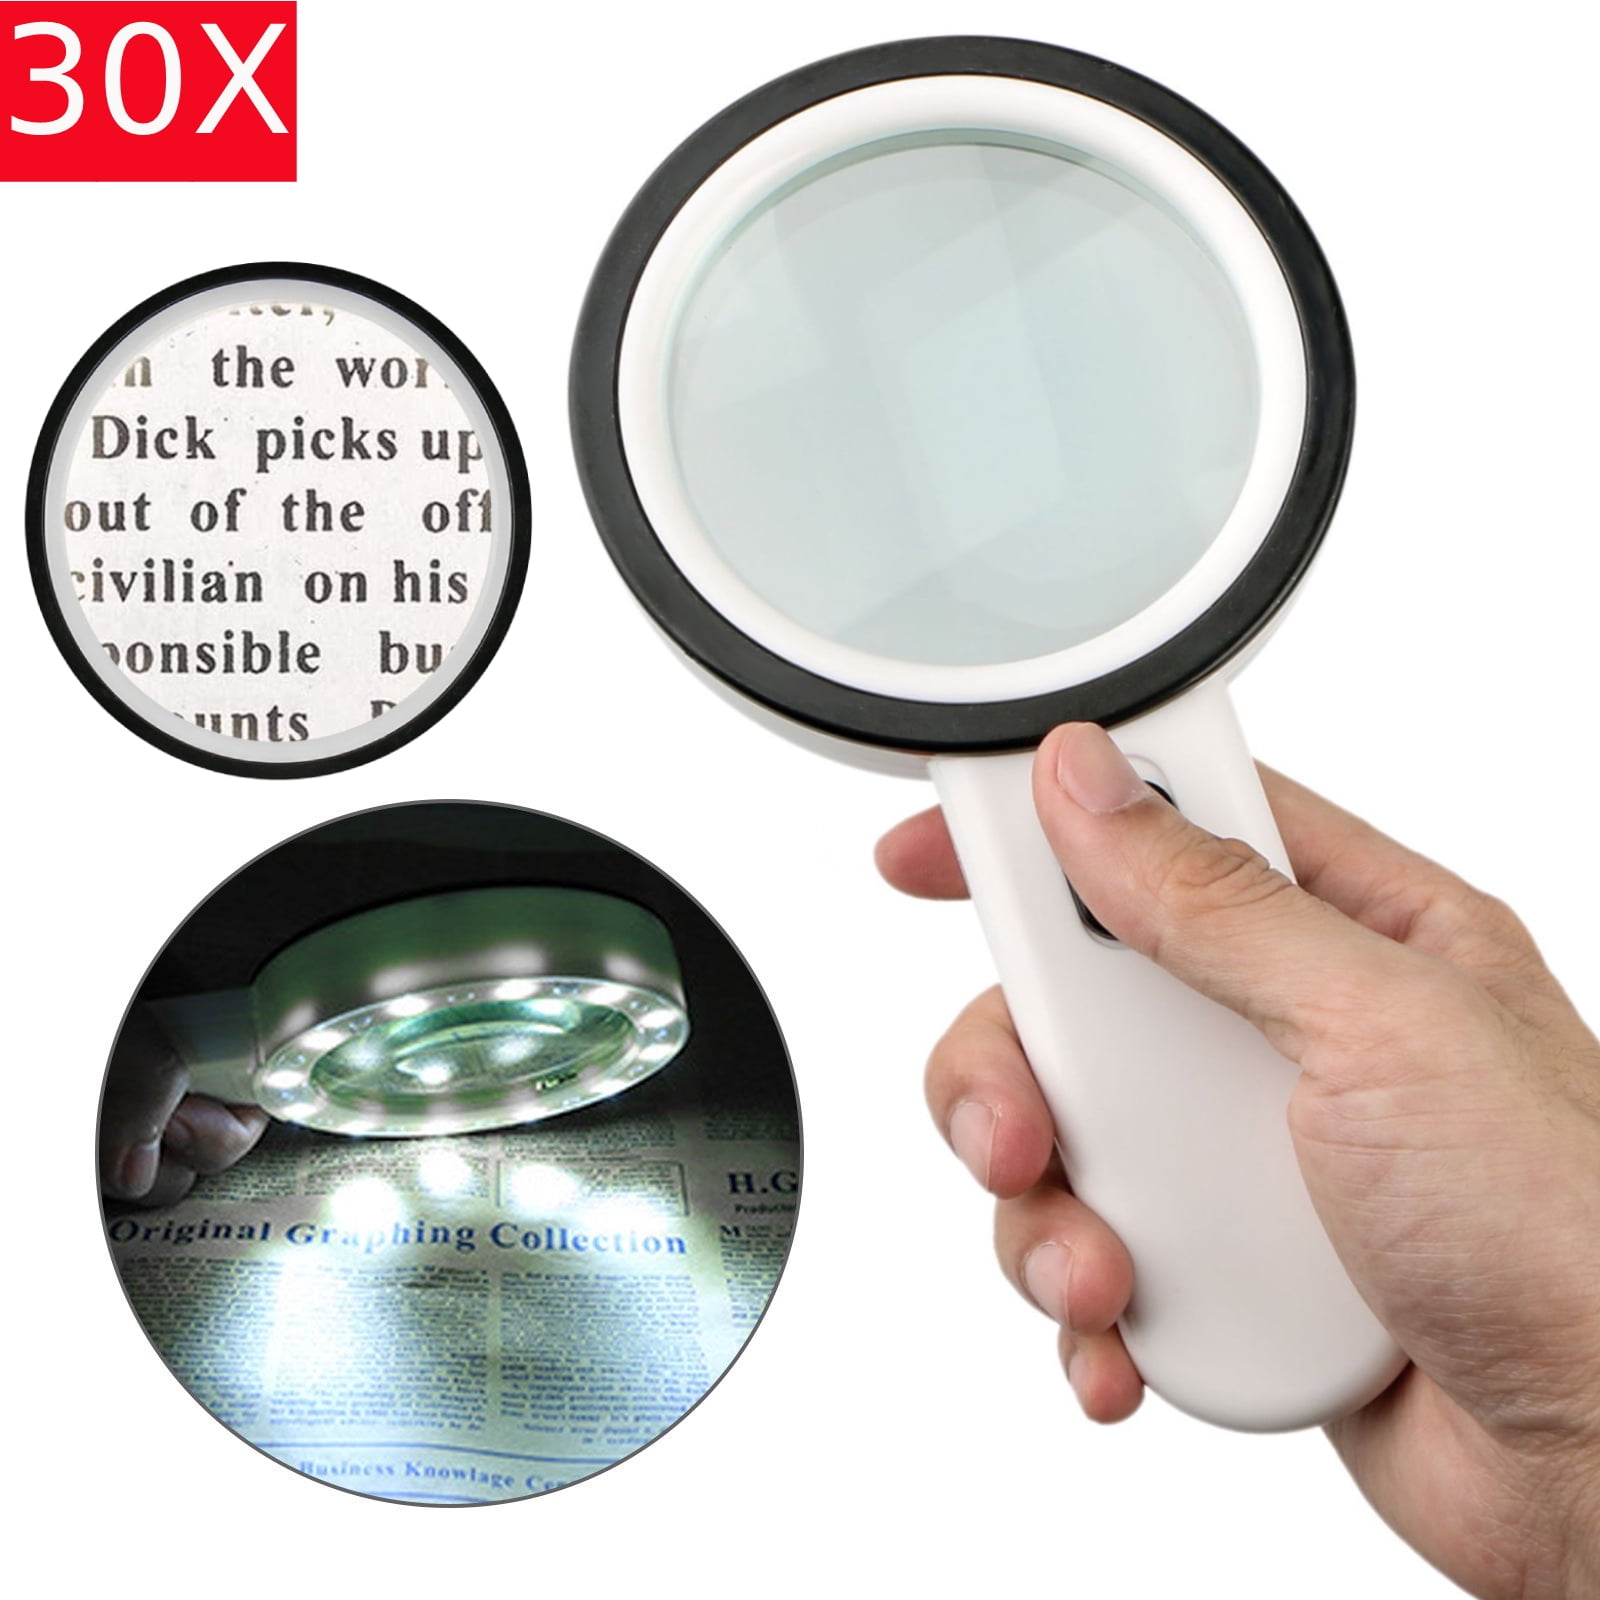 4 Dia Large Round Lens Lighted Handheld Premium Loupe EasY Magnifier Magnifying Glass 2X 4X with Very Bright 12LED Lights Best Magnifier 3 